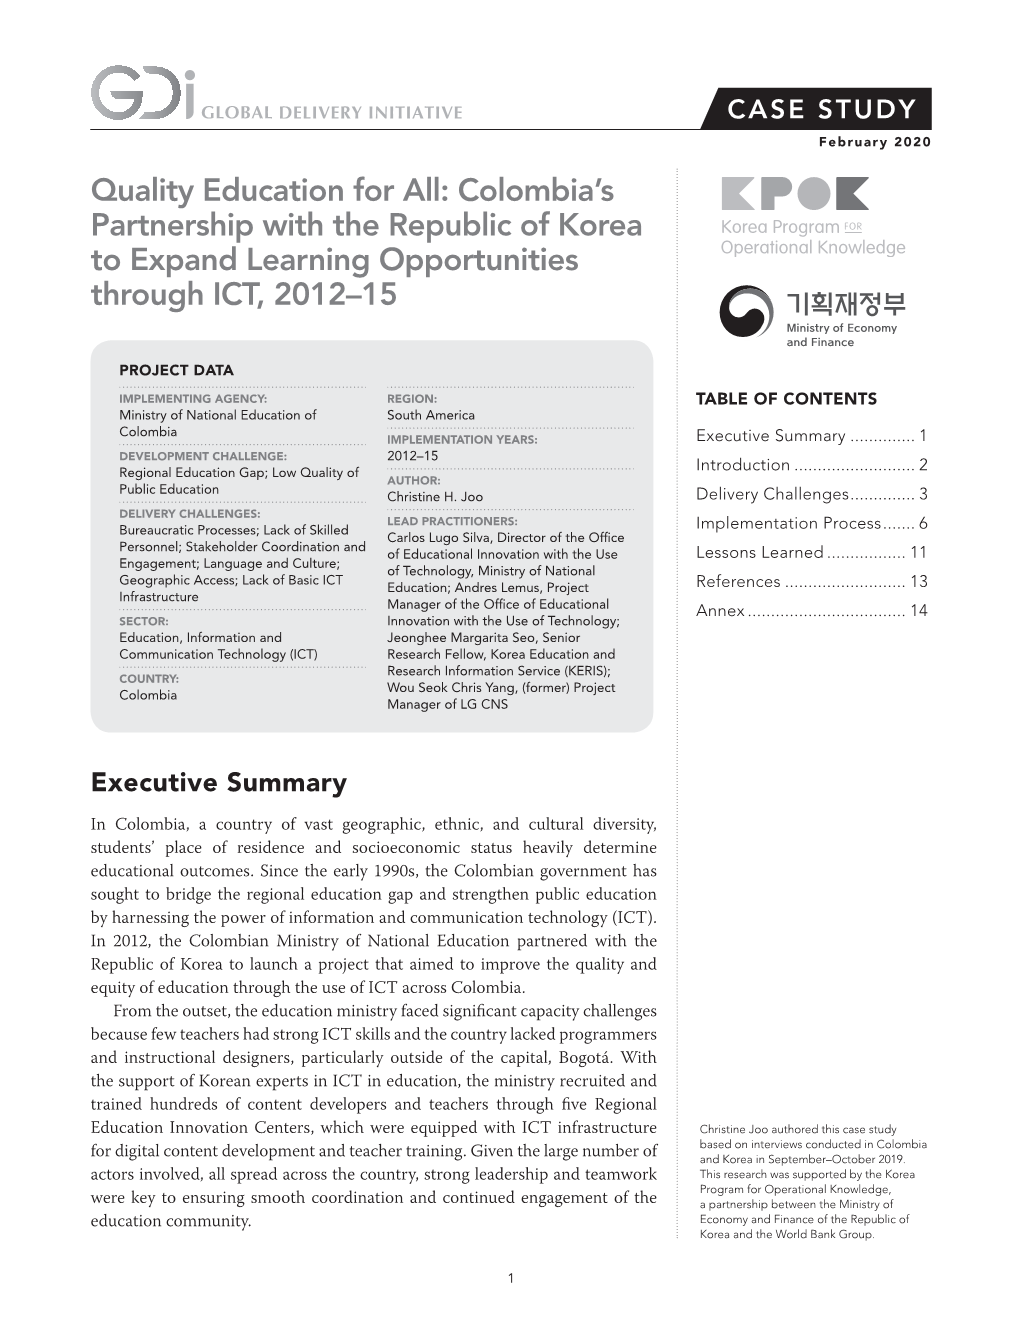 Quality Education for All: Colombia's Partnership with the Republic Of